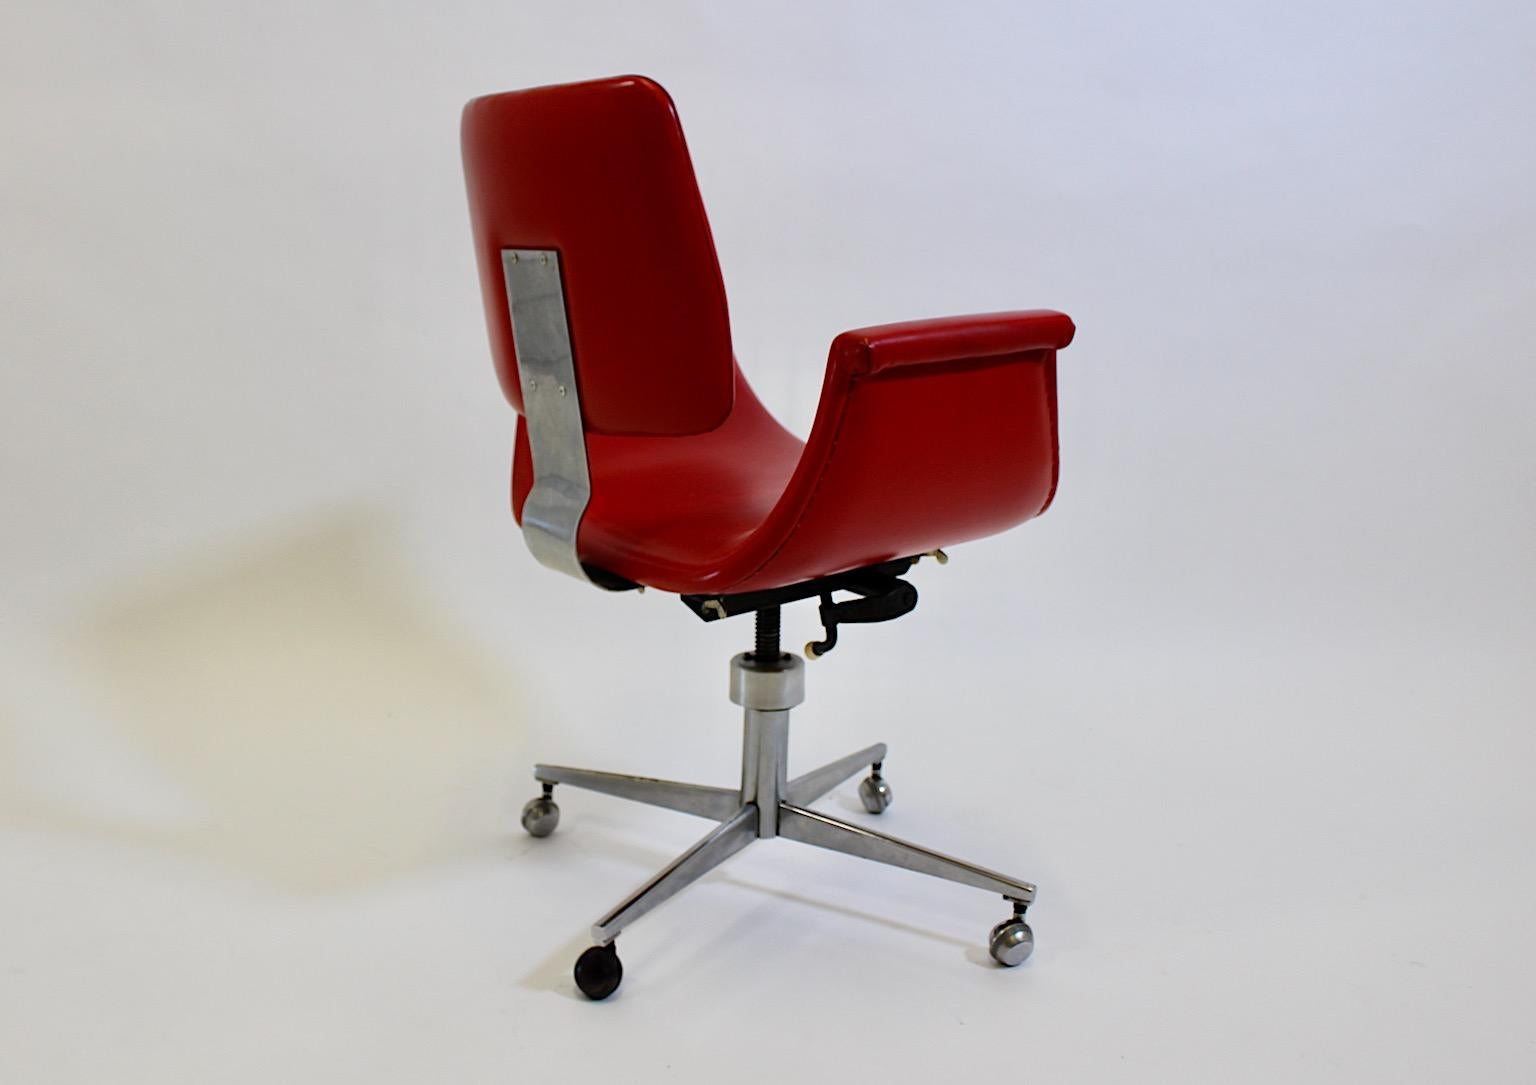 Space Age Vintage Red Faux Leather Chrome Metal Office Chair Desk Chair 1960s For Sale 2